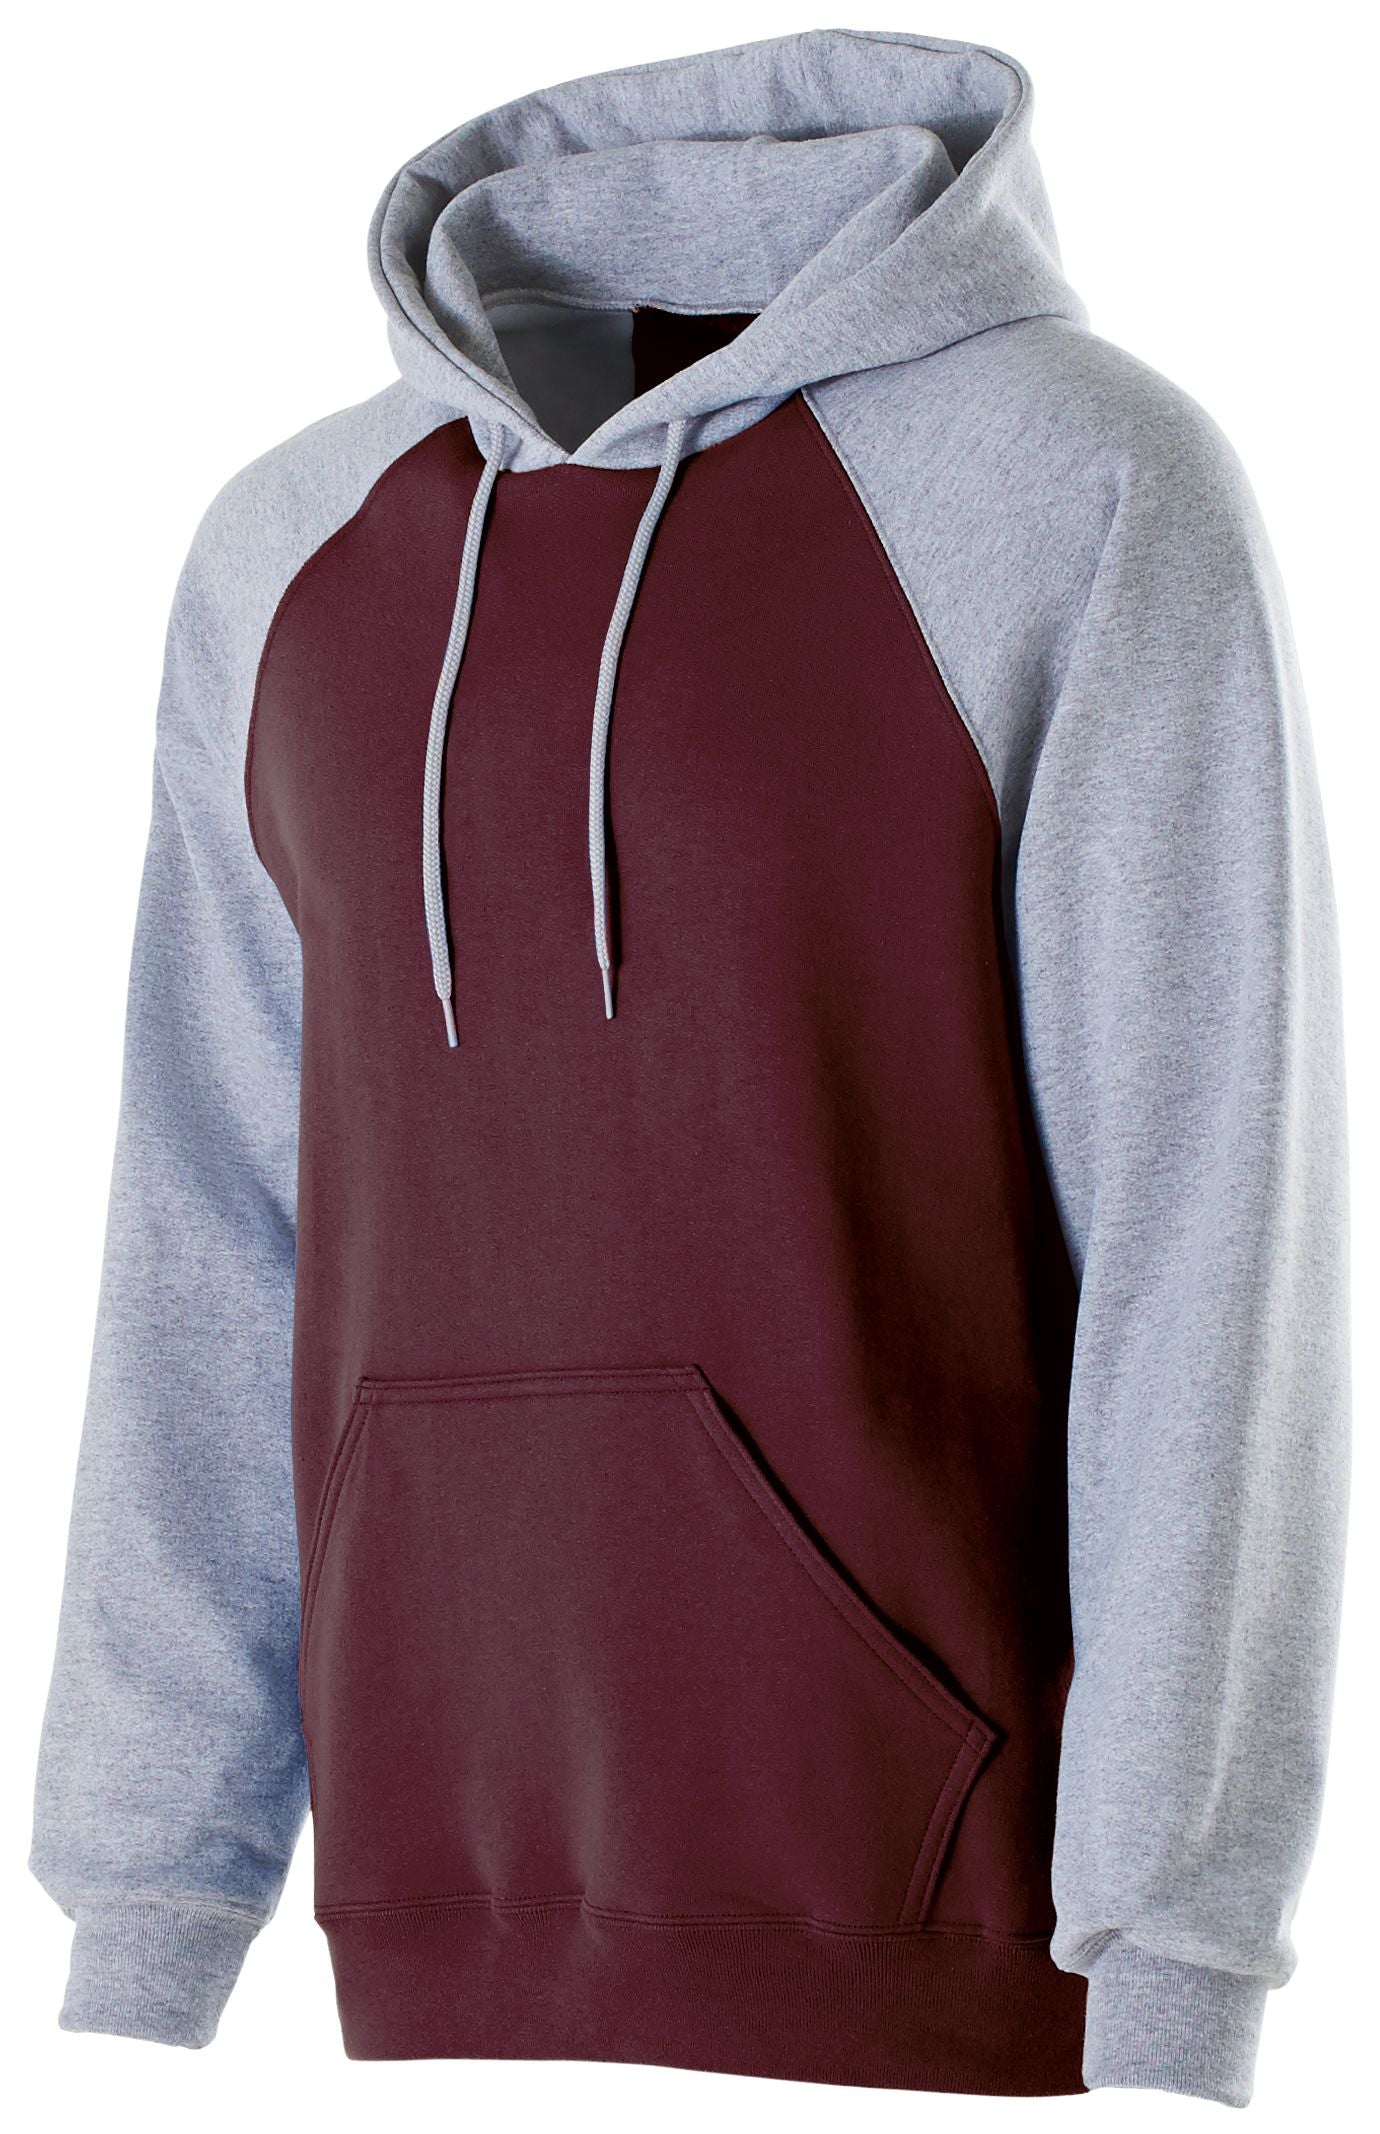 Holloway Banner Hoodie in Maroon/Athletic Heather  -Part of the Adult, Adult-Hoodie, Hoodies, Holloway product lines at KanaleyCreations.com